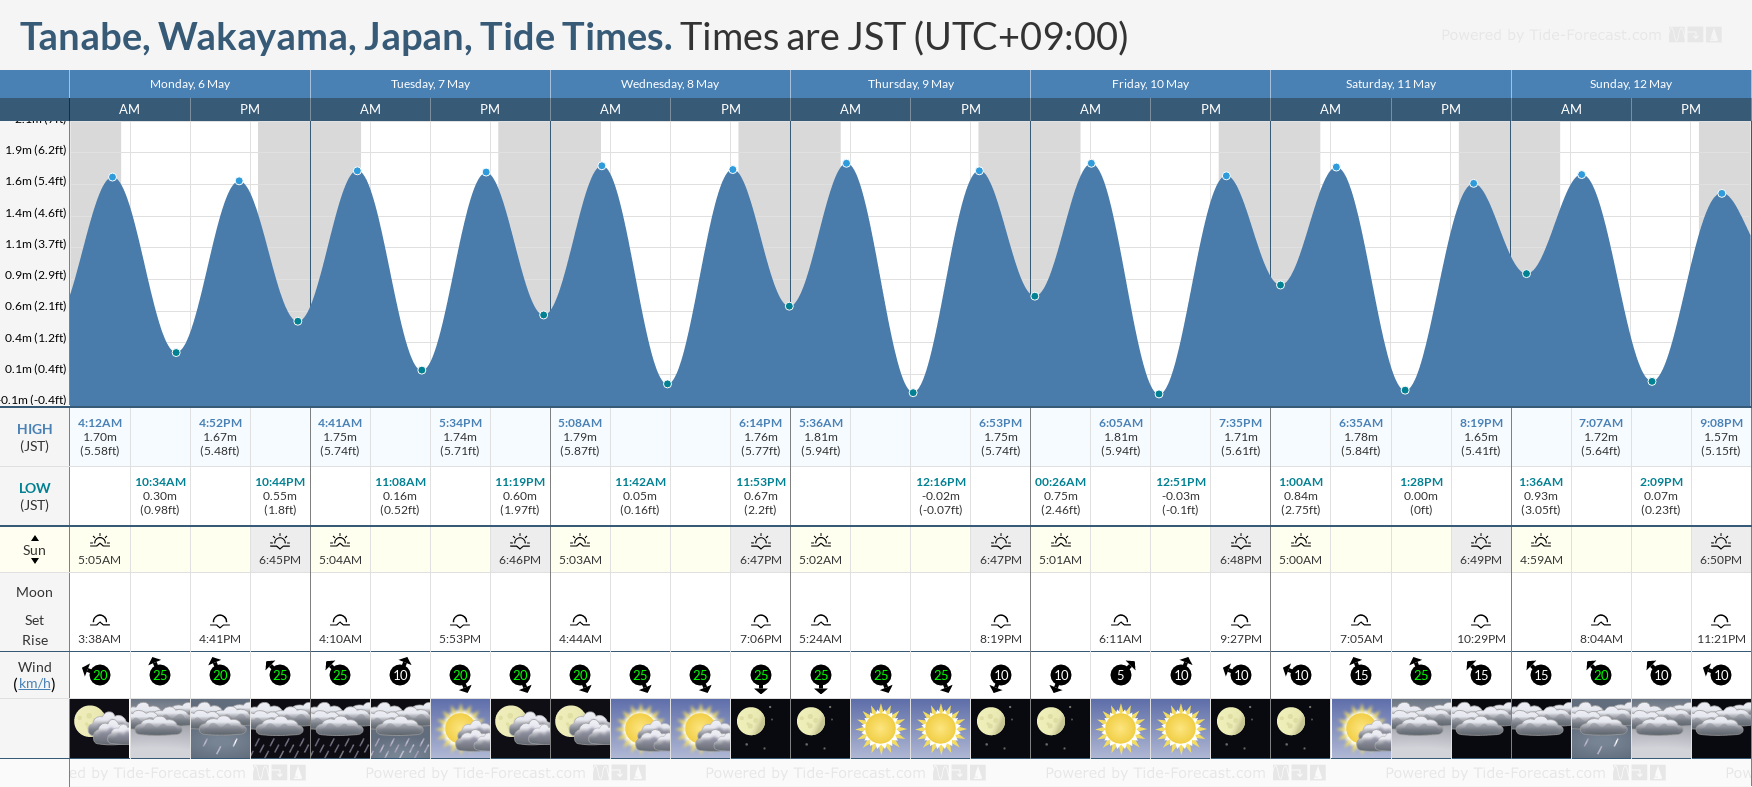 Tanabe, Wakayama, Japan Tide Chart including high and low tide times for the next 7 days